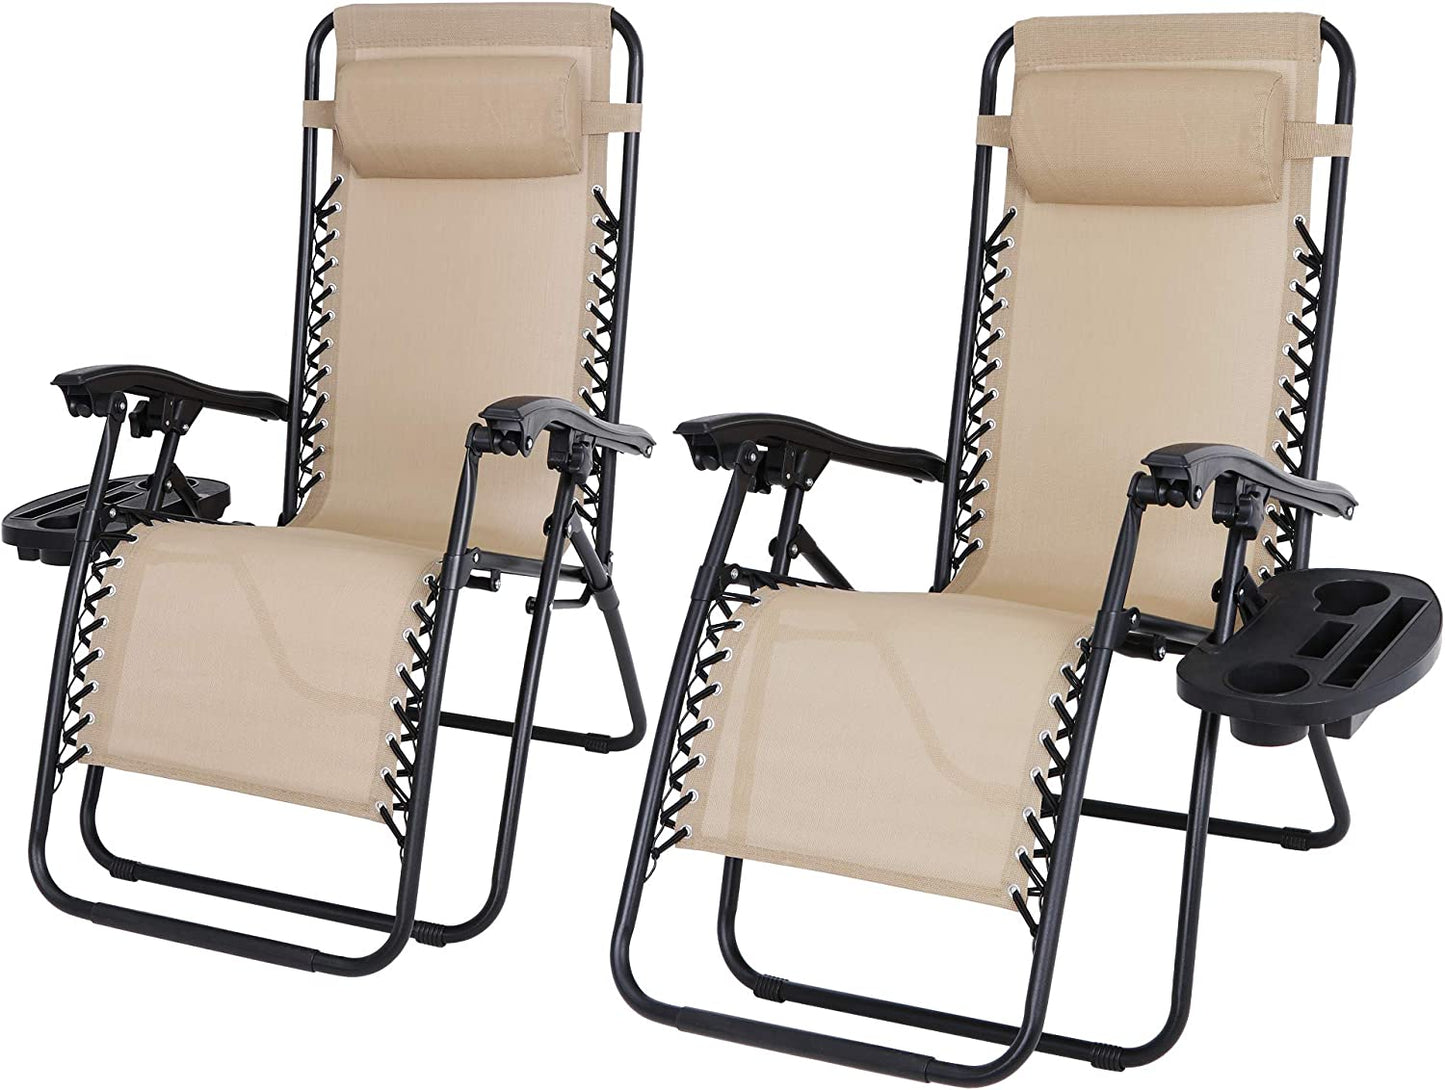 Zero Gravity Lounge Chairs Set of 2 Adjustable Folding Recliners with Cup Holders and Headrest for Patio, Pool Deck Beach Yard